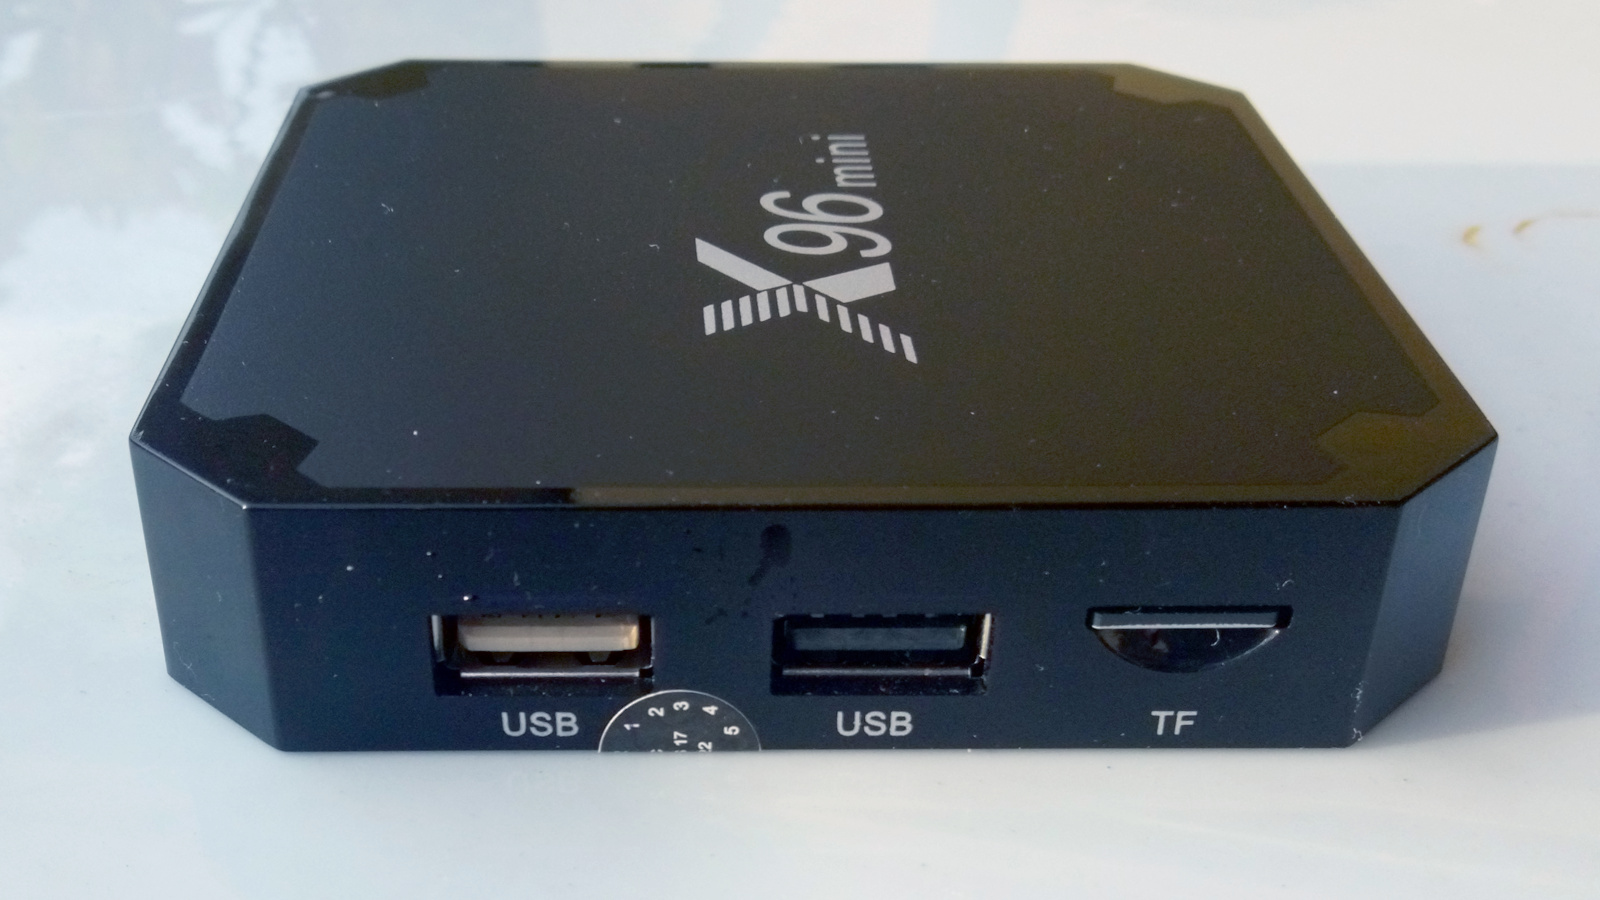 X98 mini, review: cheap Android TV-Box for KODI or IPTV